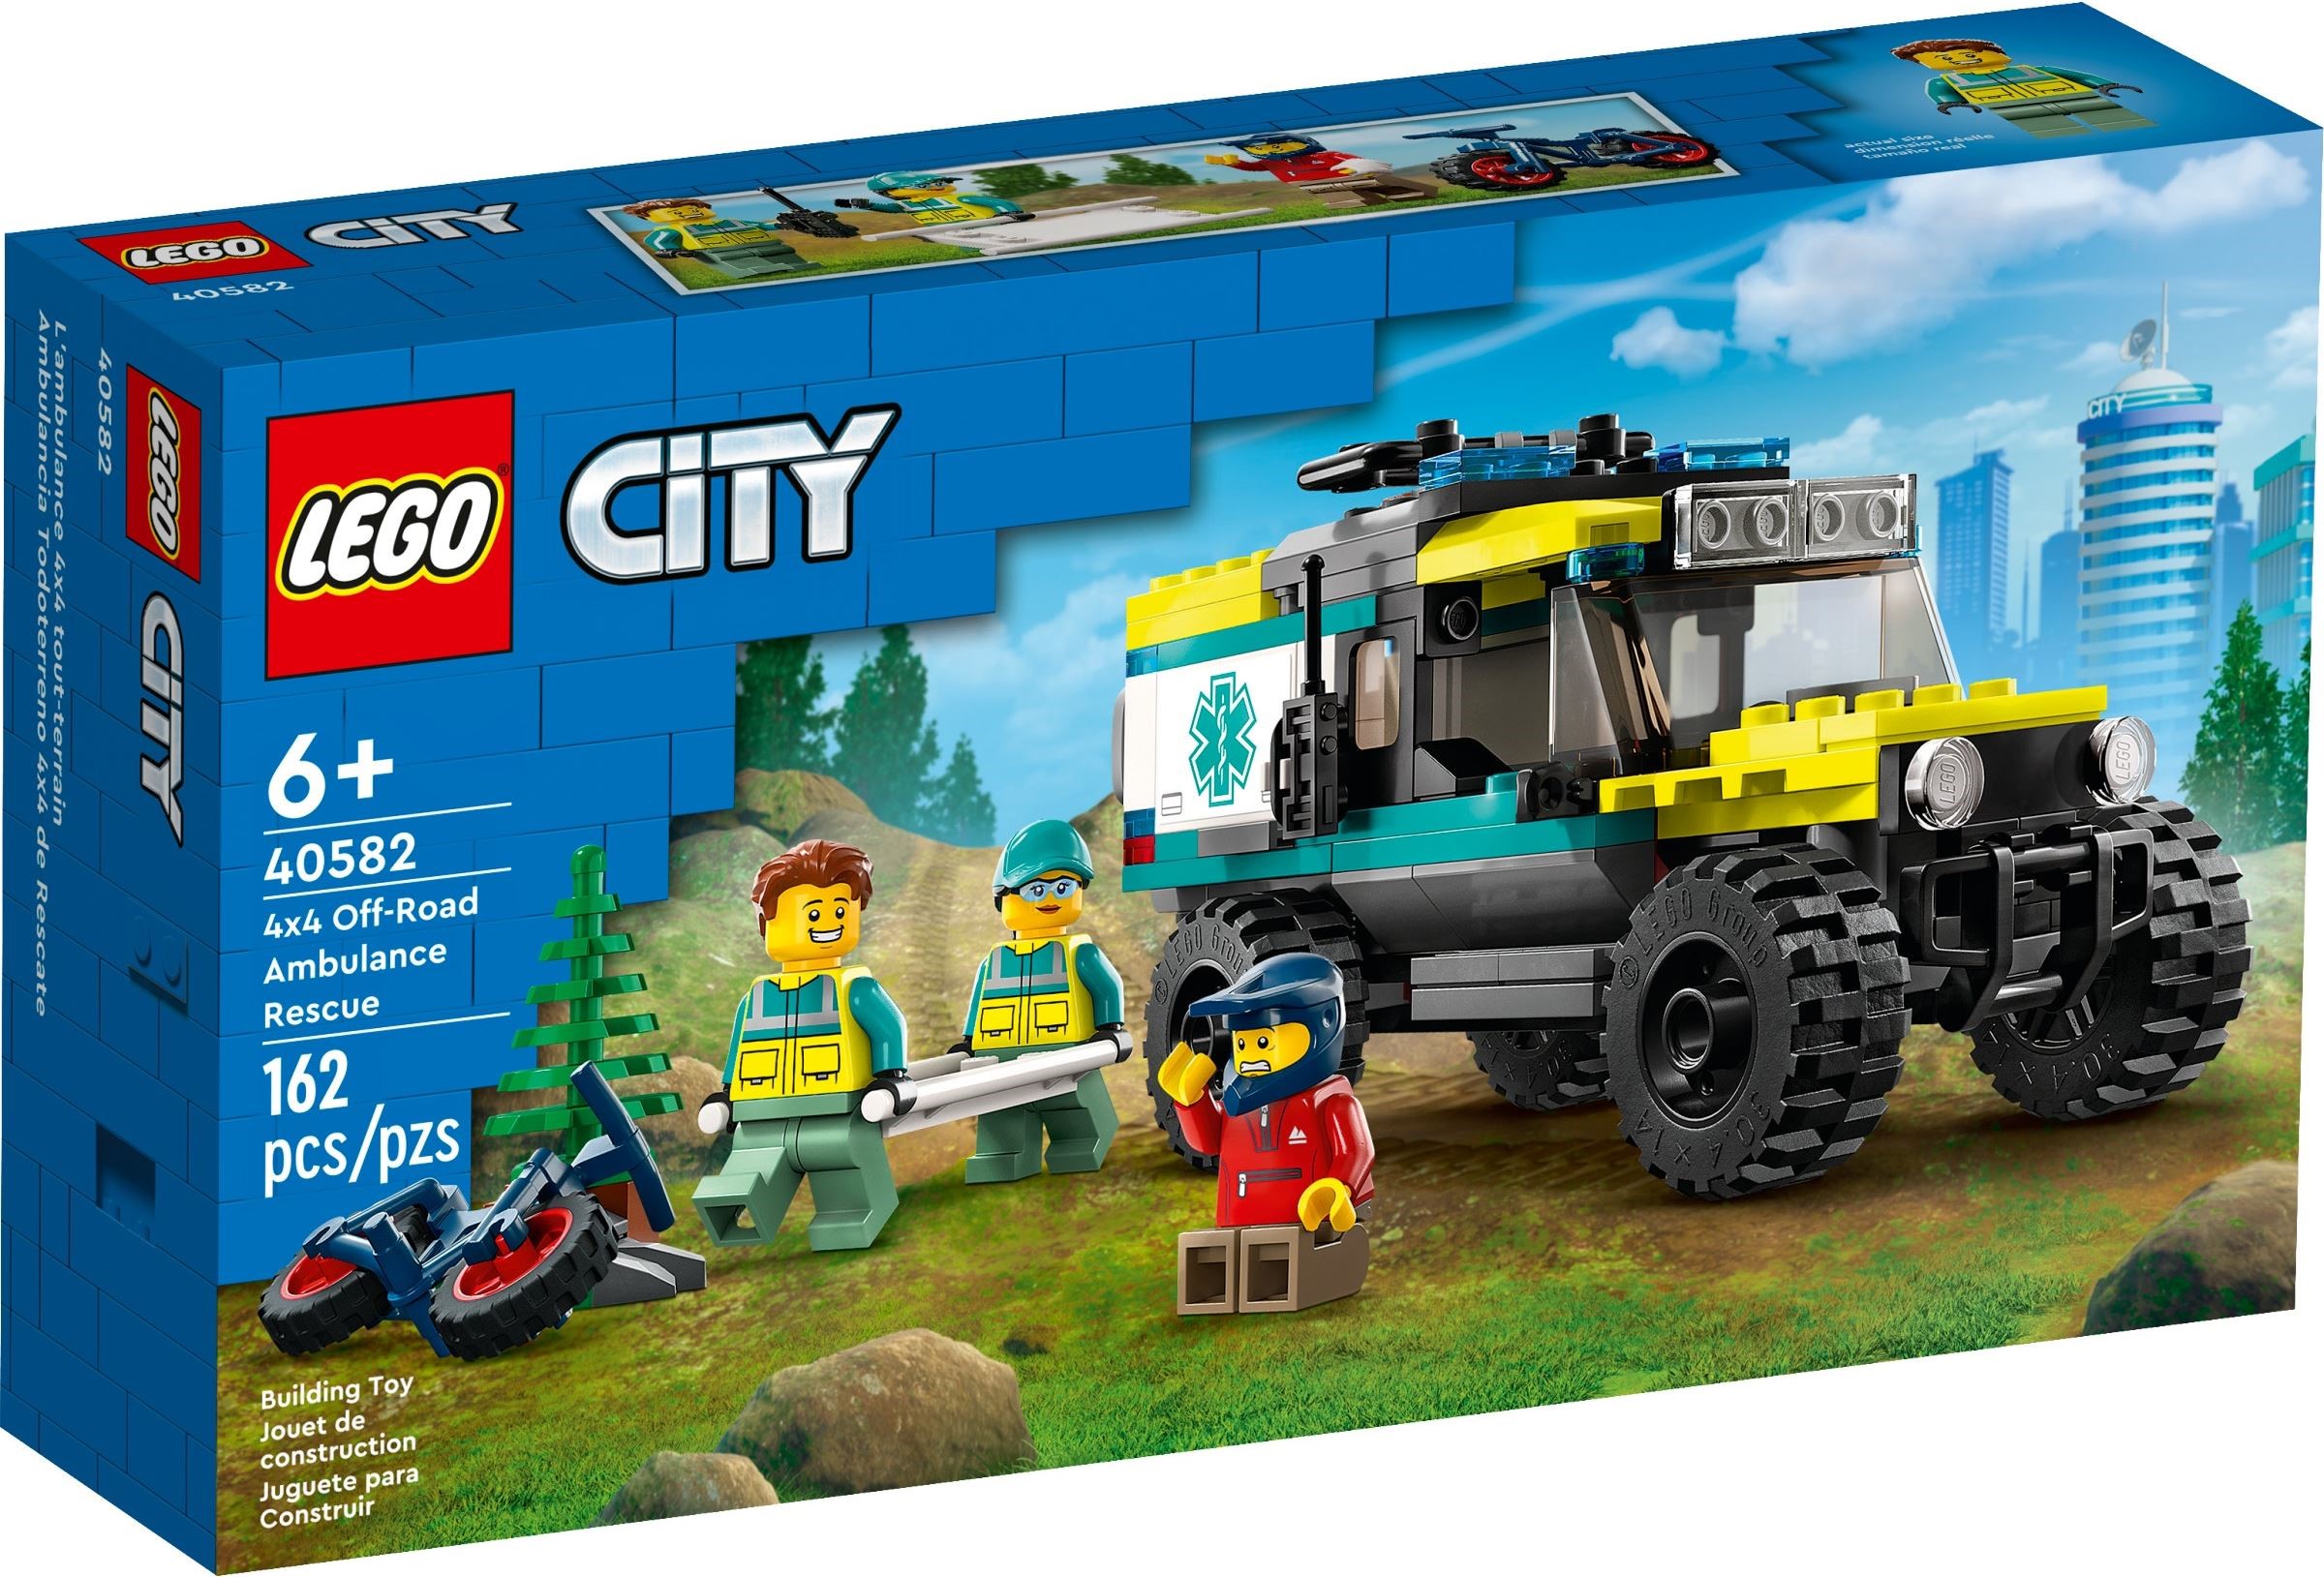 The next LEGO GWP comes to your rescue and double VIP points